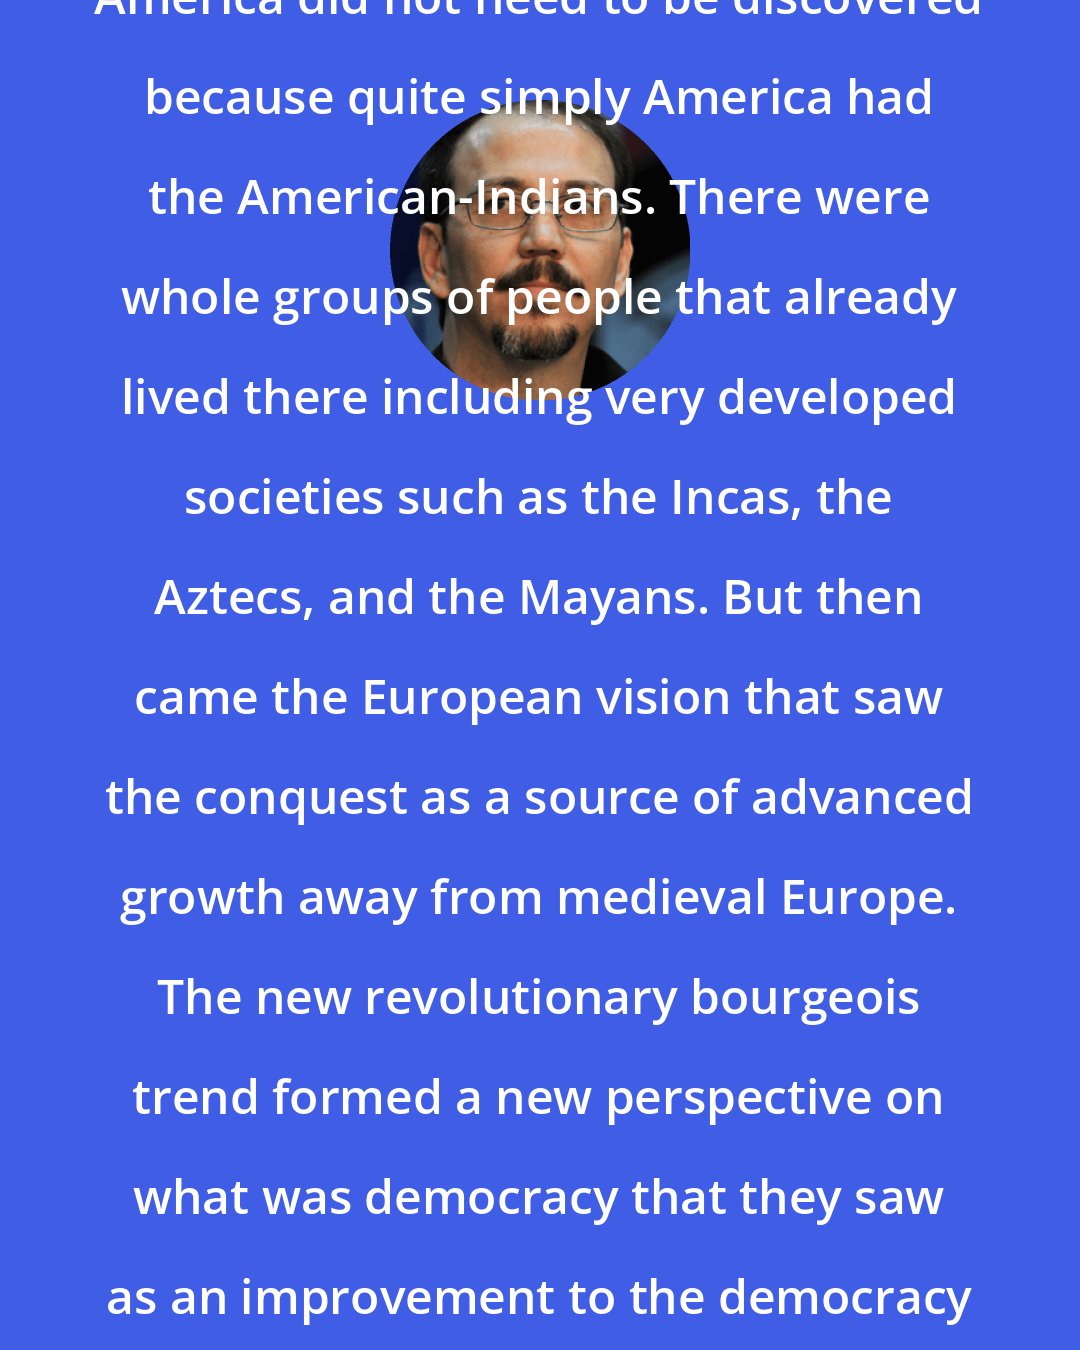 Alejandro Castro Espin: America did not need to be discovered because quite simply America had the American-Indians. There were whole groups of people that already lived there including very developed societies such as the Incas, the Aztecs, and the Mayans. But then came the European vision that saw the conquest as a source of advanced growth away from medieval Europe. The new revolutionary bourgeois trend formed a new perspective on what was democracy that they saw as an improvement to the democracy of ancient Greece.